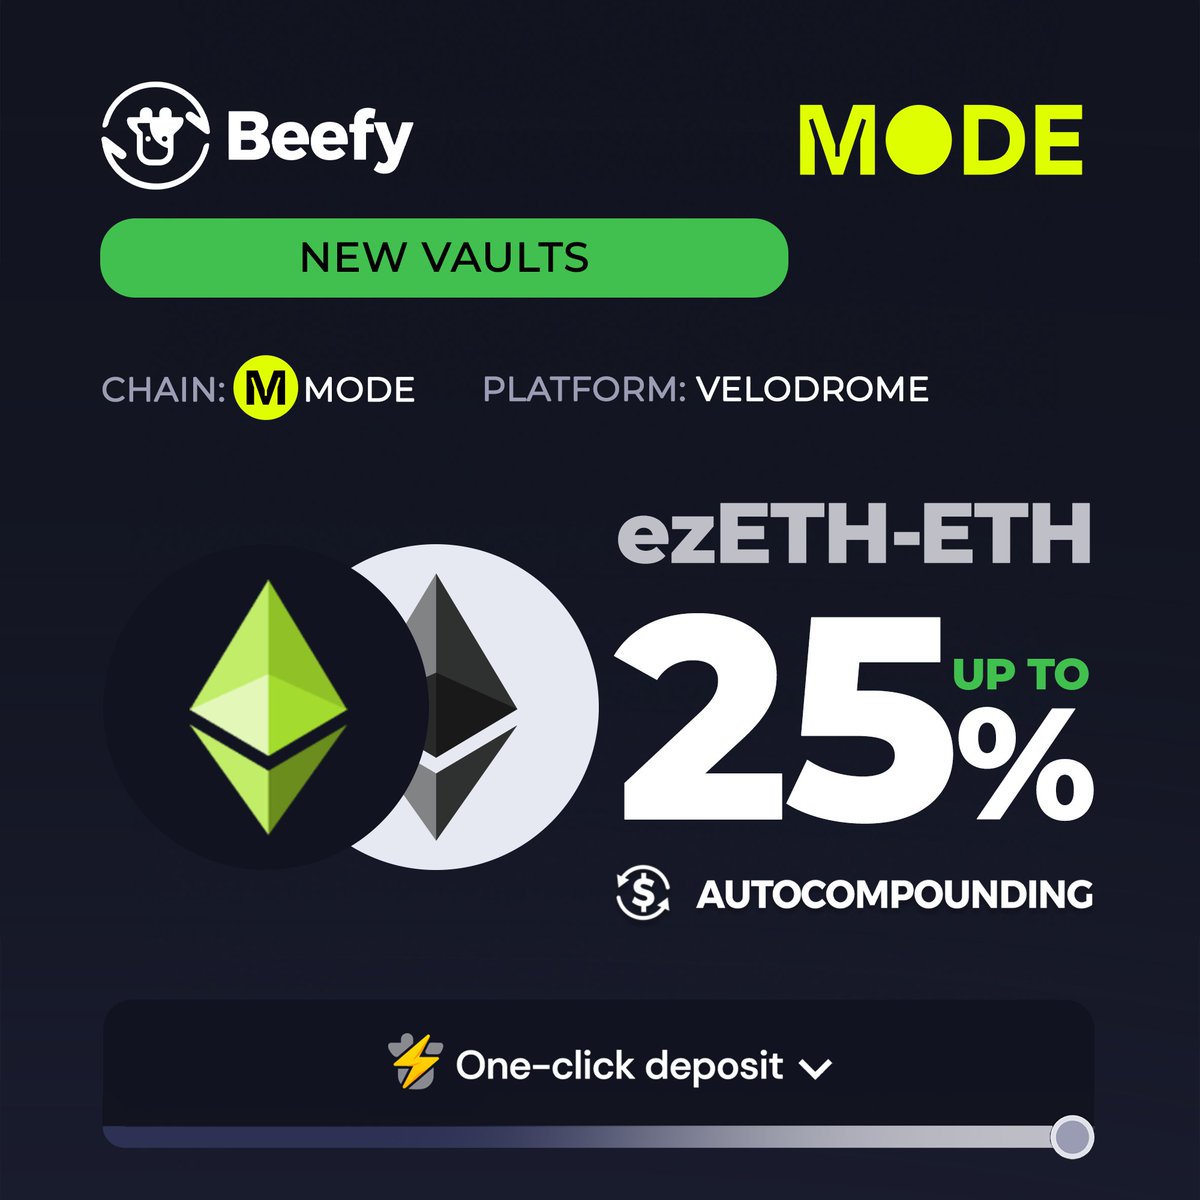 Obviously we got easy eth mode right here. Price go up mode can continue. 🆕 $ezETH - $ETH: 25% APY 👉 app.beefy.com/vault/velodrom… @RenzoProtocol @velodromefi @modenetwork